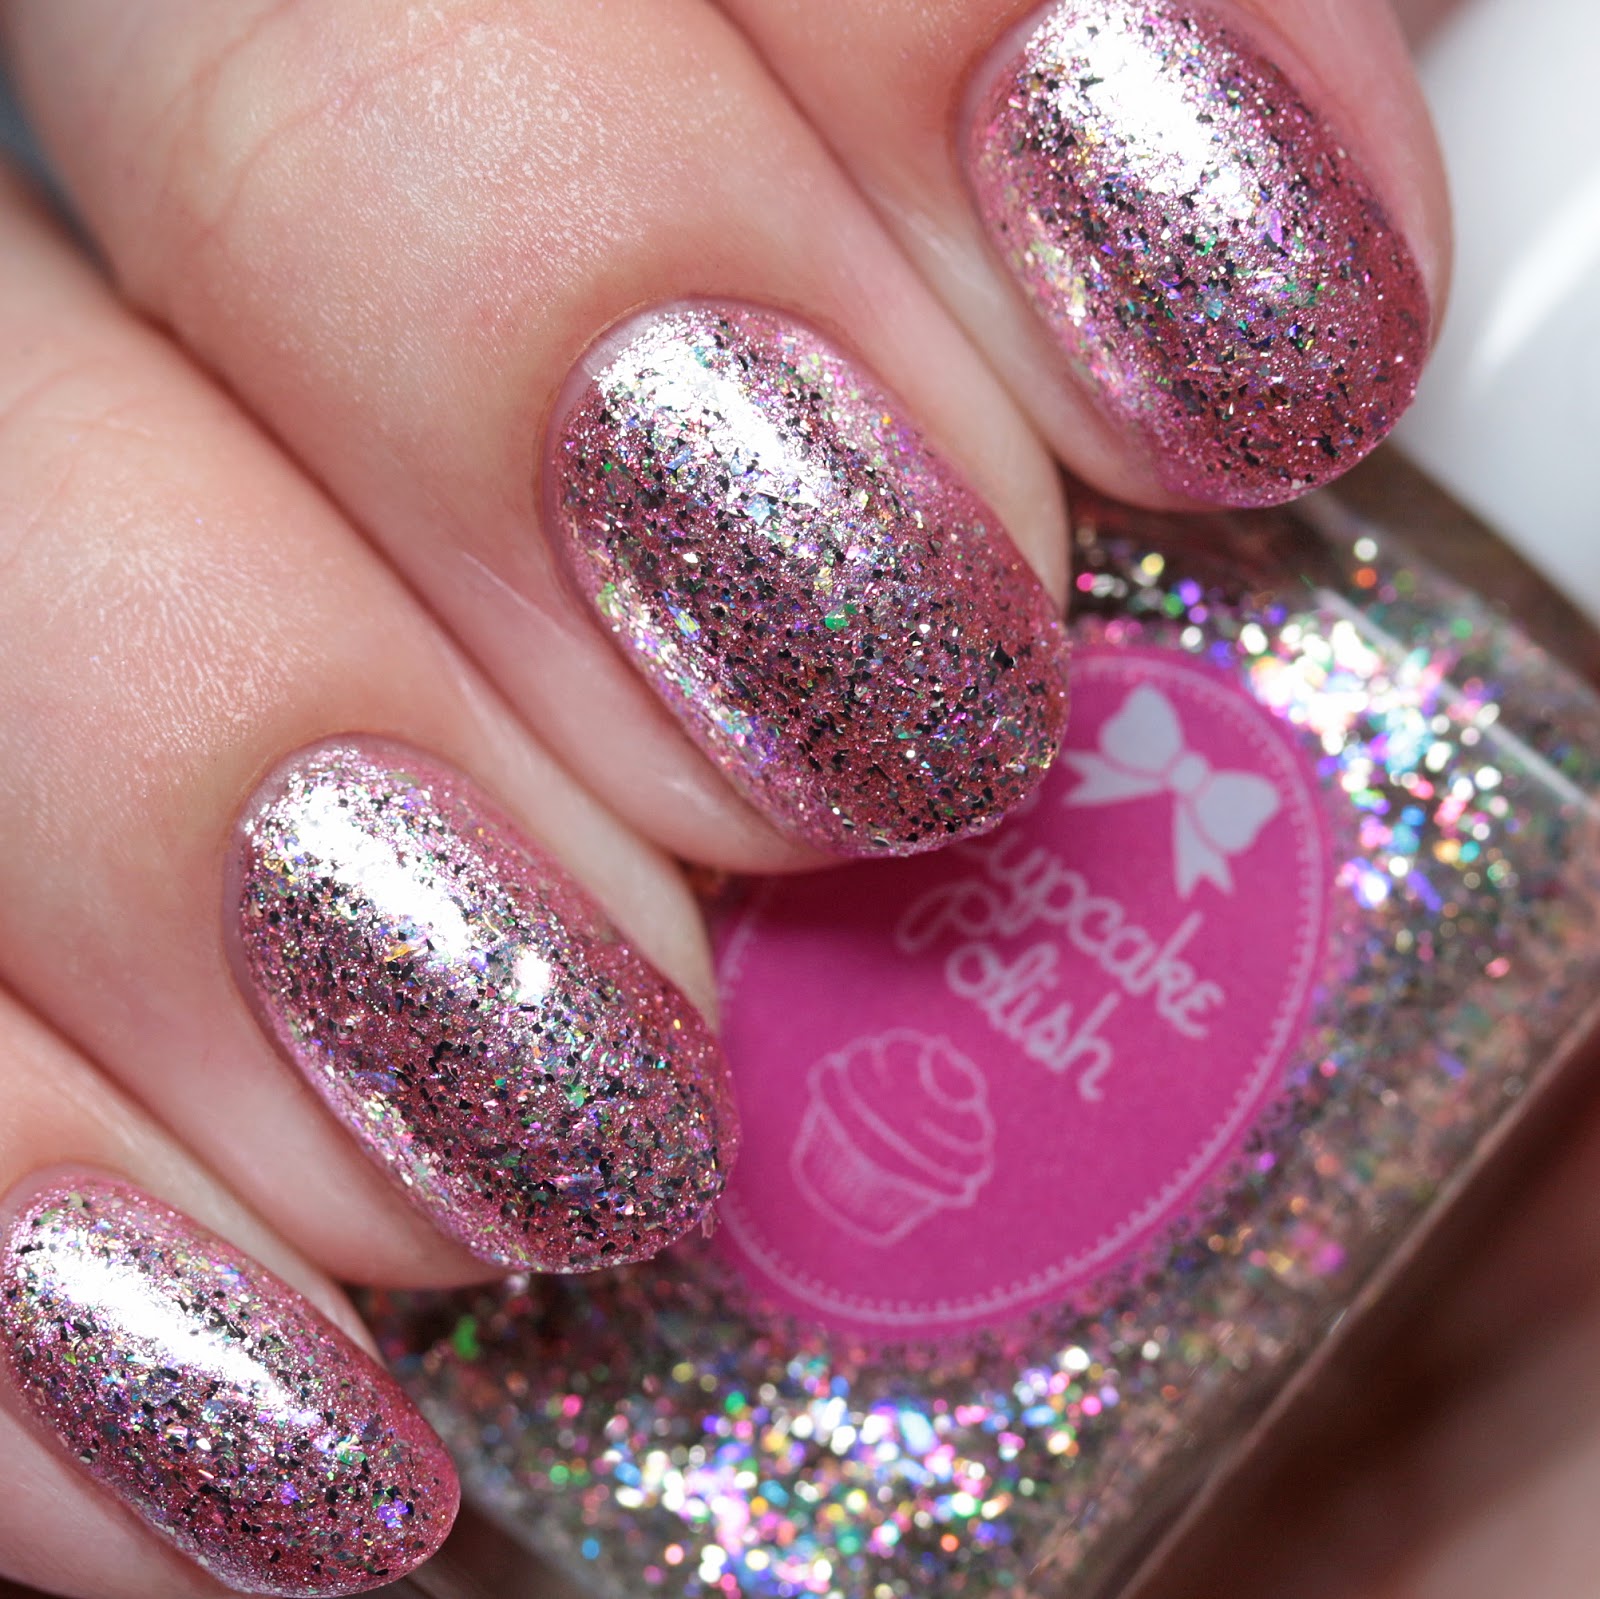 The Polished Hippy: Cupcake Polish 5th Anniversary Trio Swatches and Review